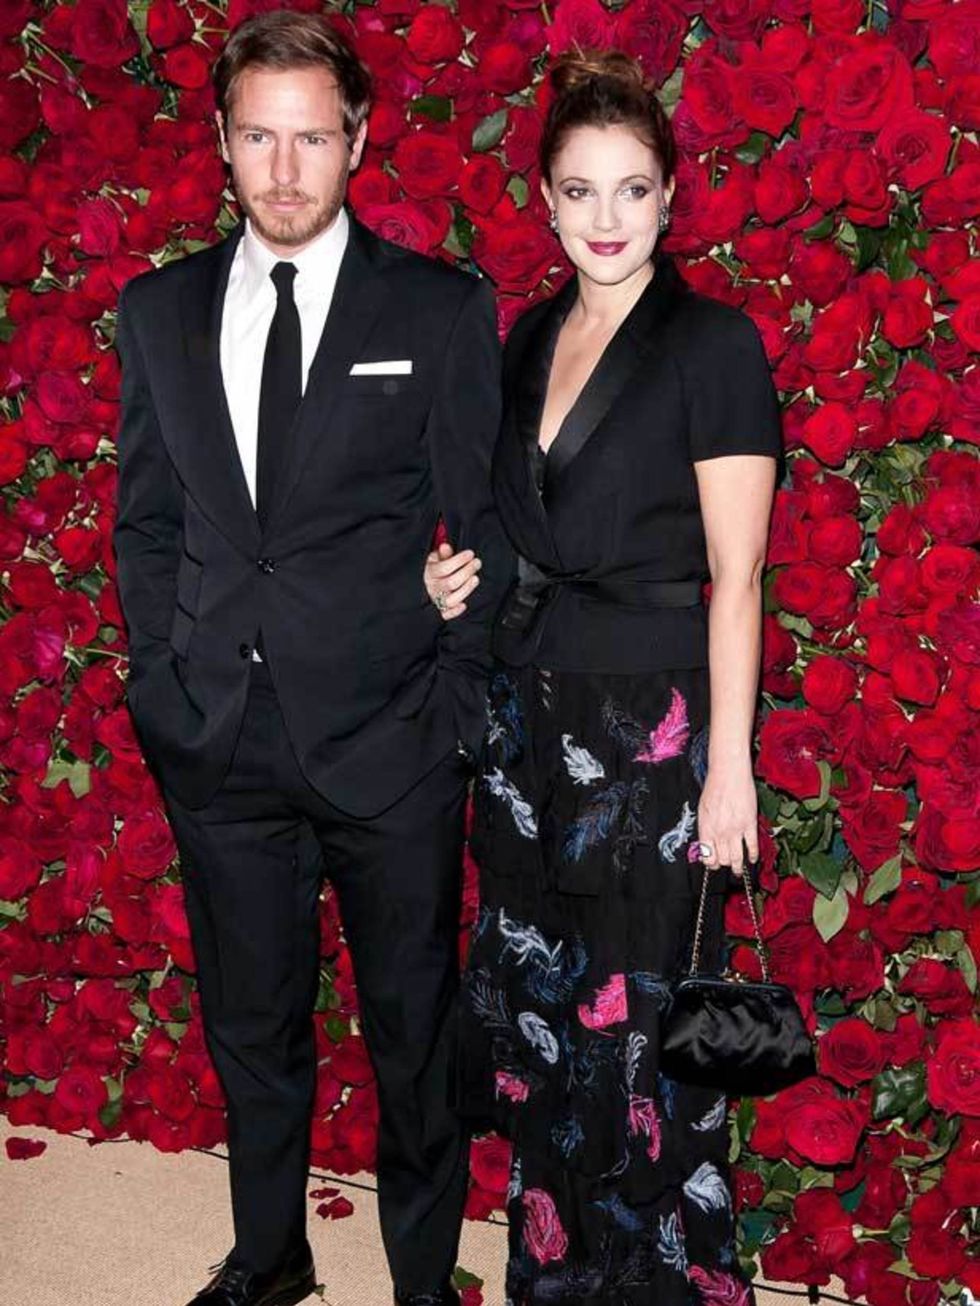 <p><a href="http://www.elleuk.com/starstyle/style-files/(section)/drew-barrymore">Drew Barrymore</a> hits the red carpet in a feather print dress at the Museum of Modern Art's 4th Annual Film benefit 'A Tribute to Pedro Almodovar' in New York, 15 November